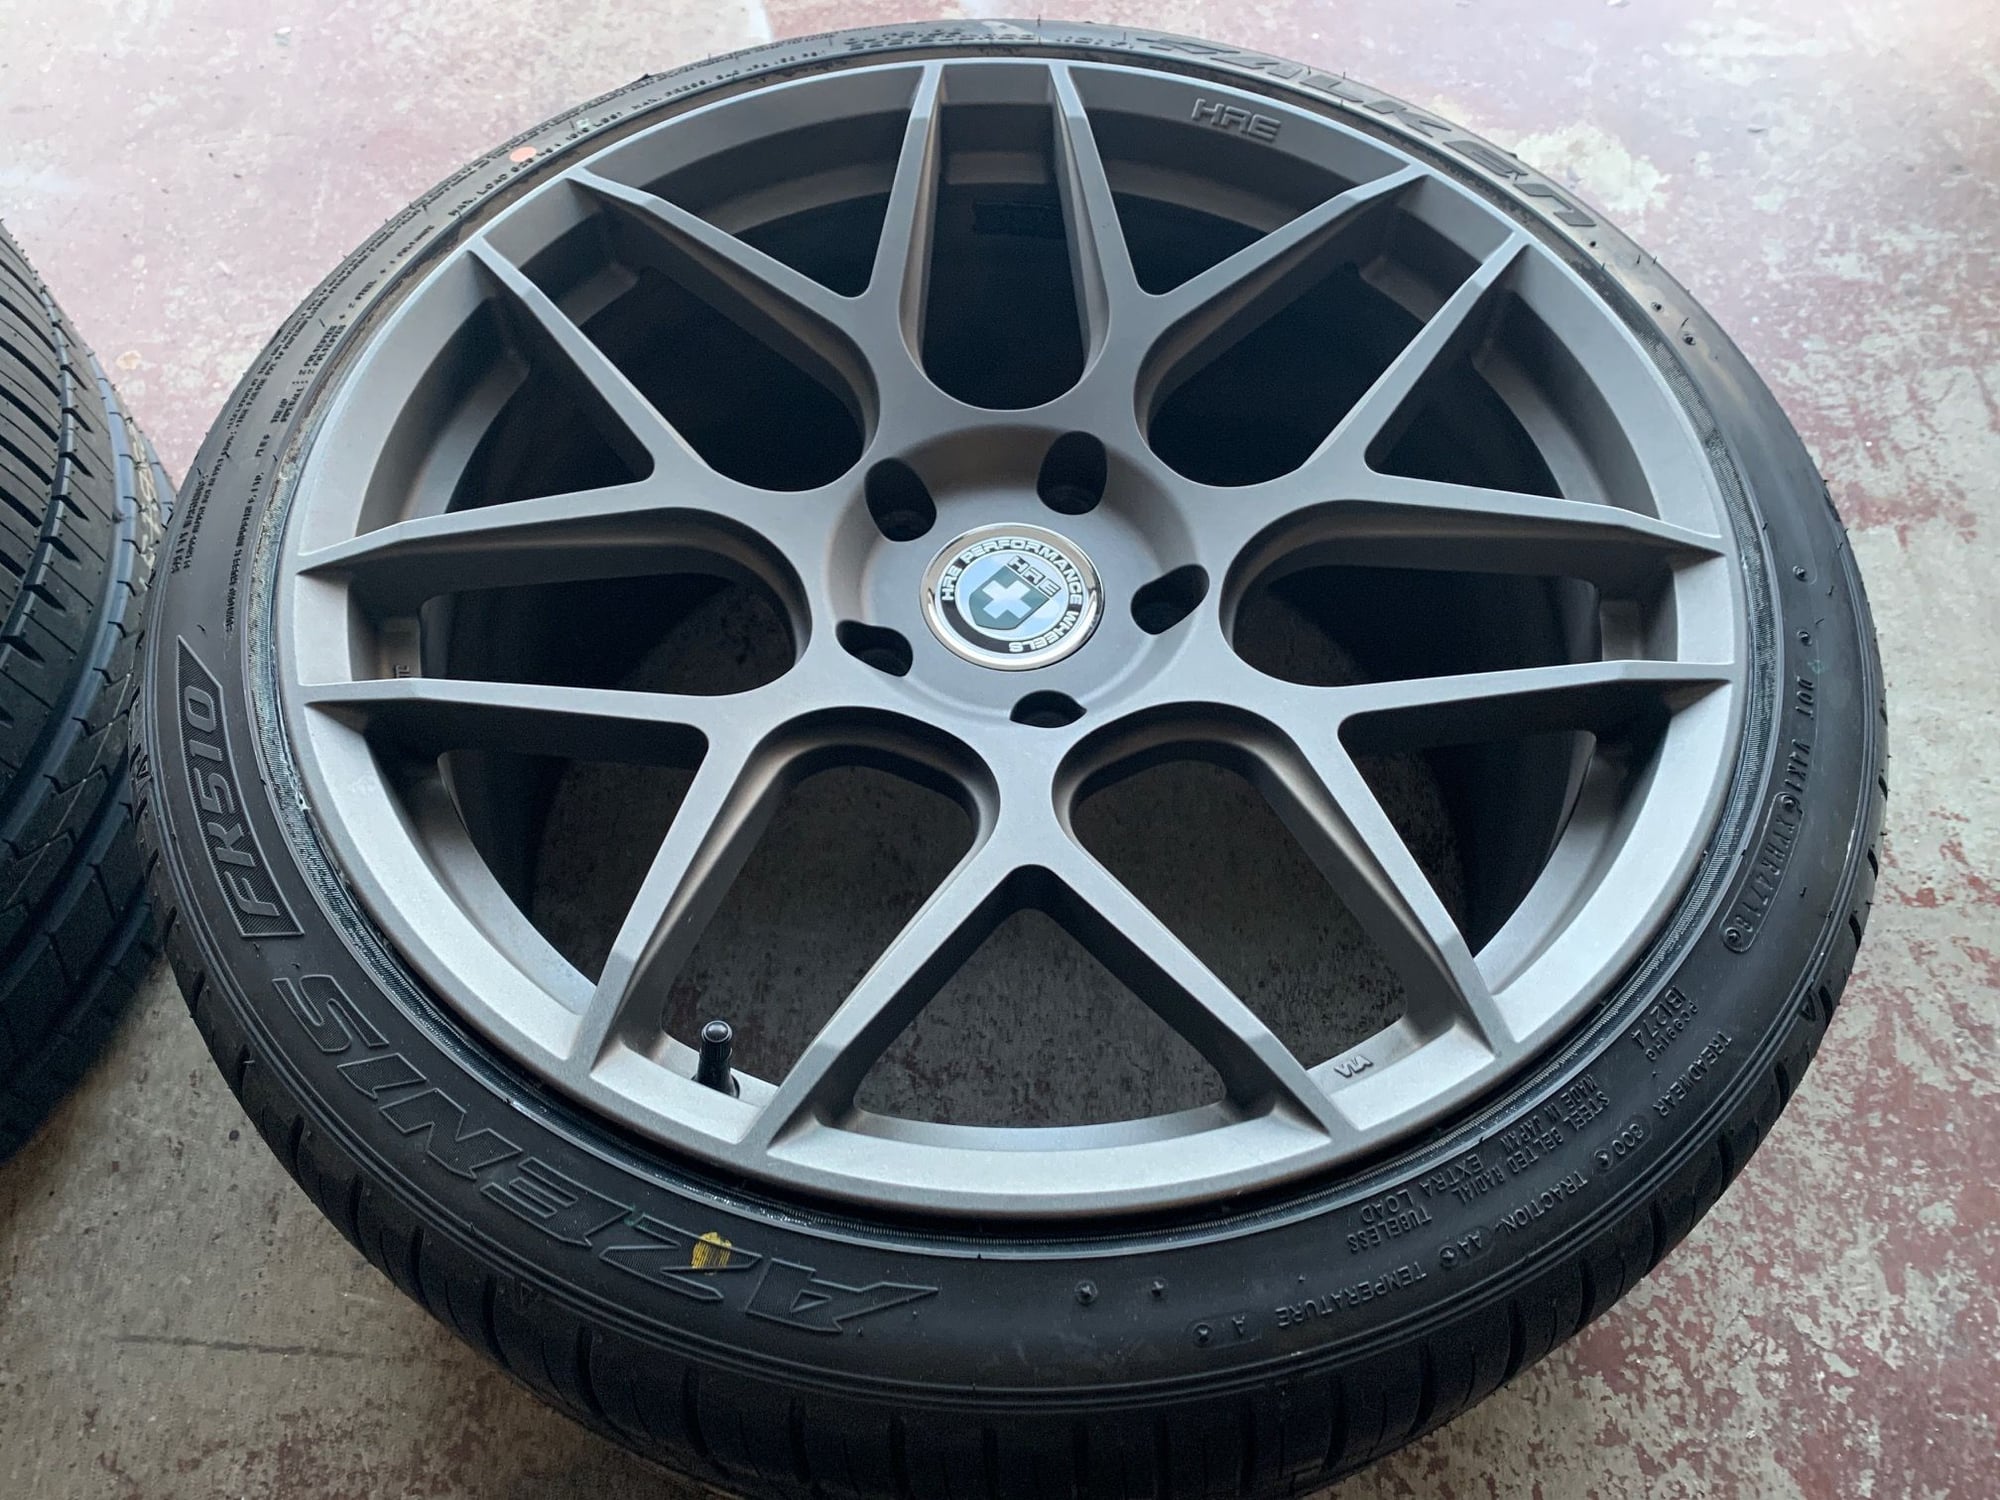 Wheels and Tires/Axles - 20" HRE FF01 w/tires - Used - 2000 to 2019 Porsche 911 - Fremont, CA 94538, United States